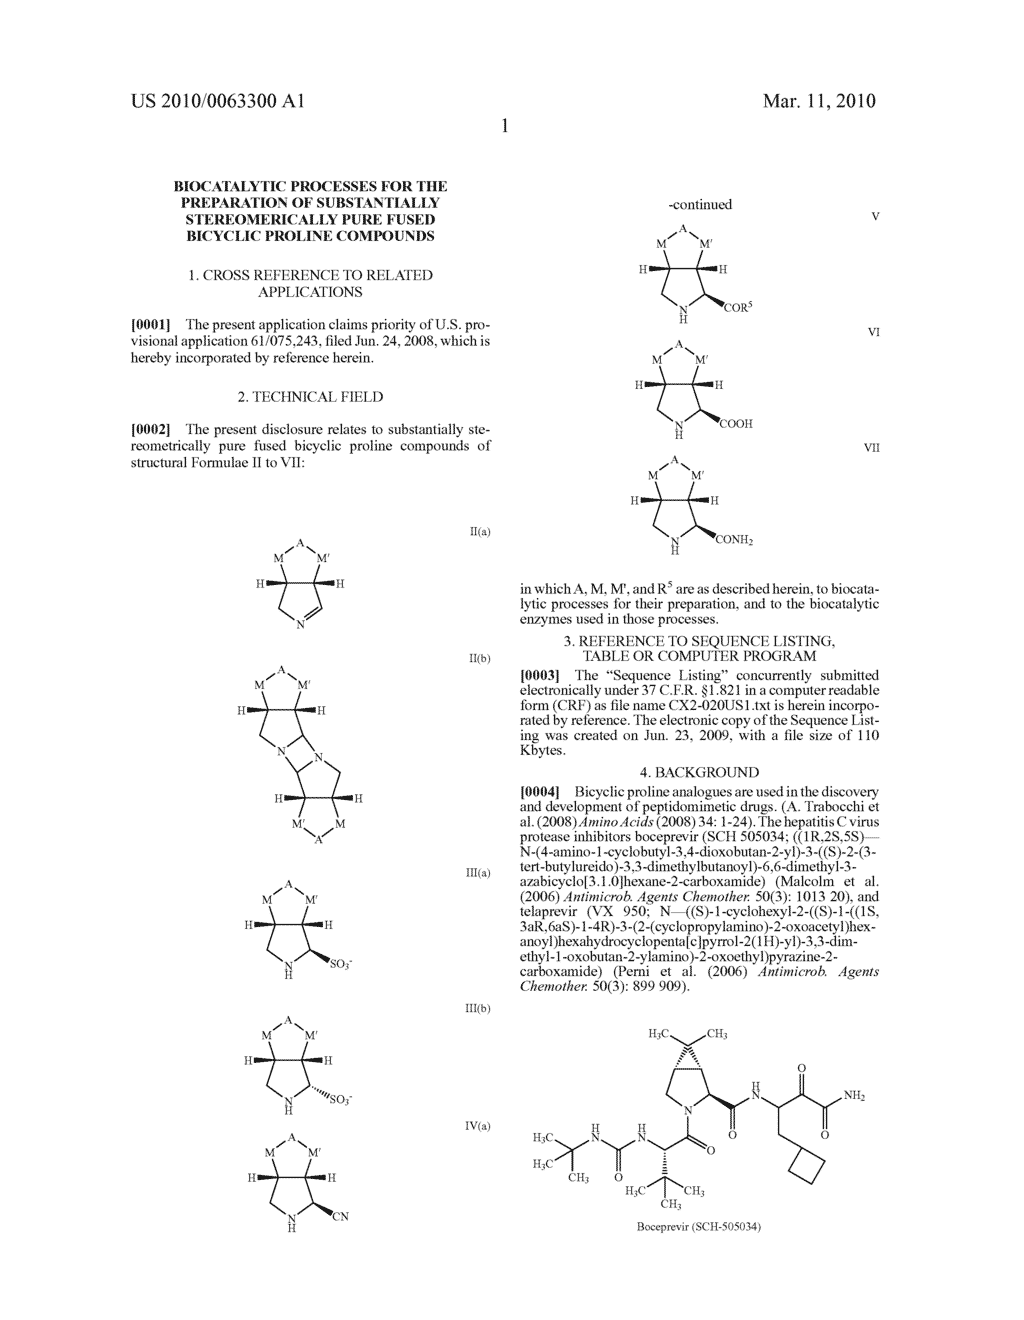 BIOCATALYTIC PROCESSES FOR THE PREPARATION OF SUBSTANTIALLY STEREOMERICALLY PURE FUSED BICYCLIC PROLINE COMPOUNDS - diagram, schematic, and image 02